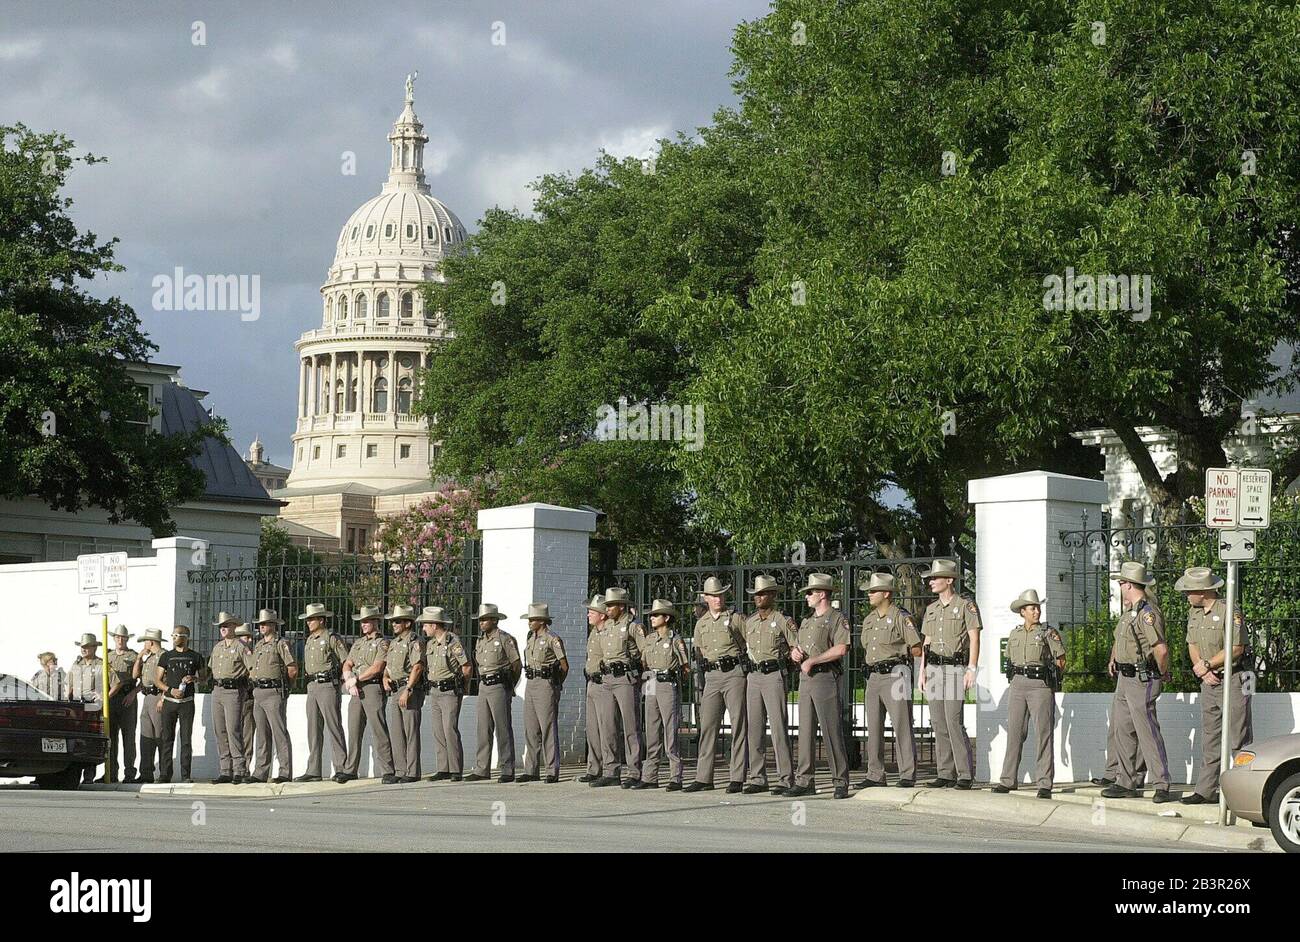 Austin, Texas USA, June 19 2000: Texas Department of Public Safety troopers guard the rear entrance to the  Governor's Mansion, home of presidential candidate George W. Bush, Monday following an anti-death penalty protest that resulted in the arrest of more than 20 demonstrators. The protesters, blocking the driveway, were calling for a moratorium on all executions in Texas. ©Bob Daemmrich Stock Photo